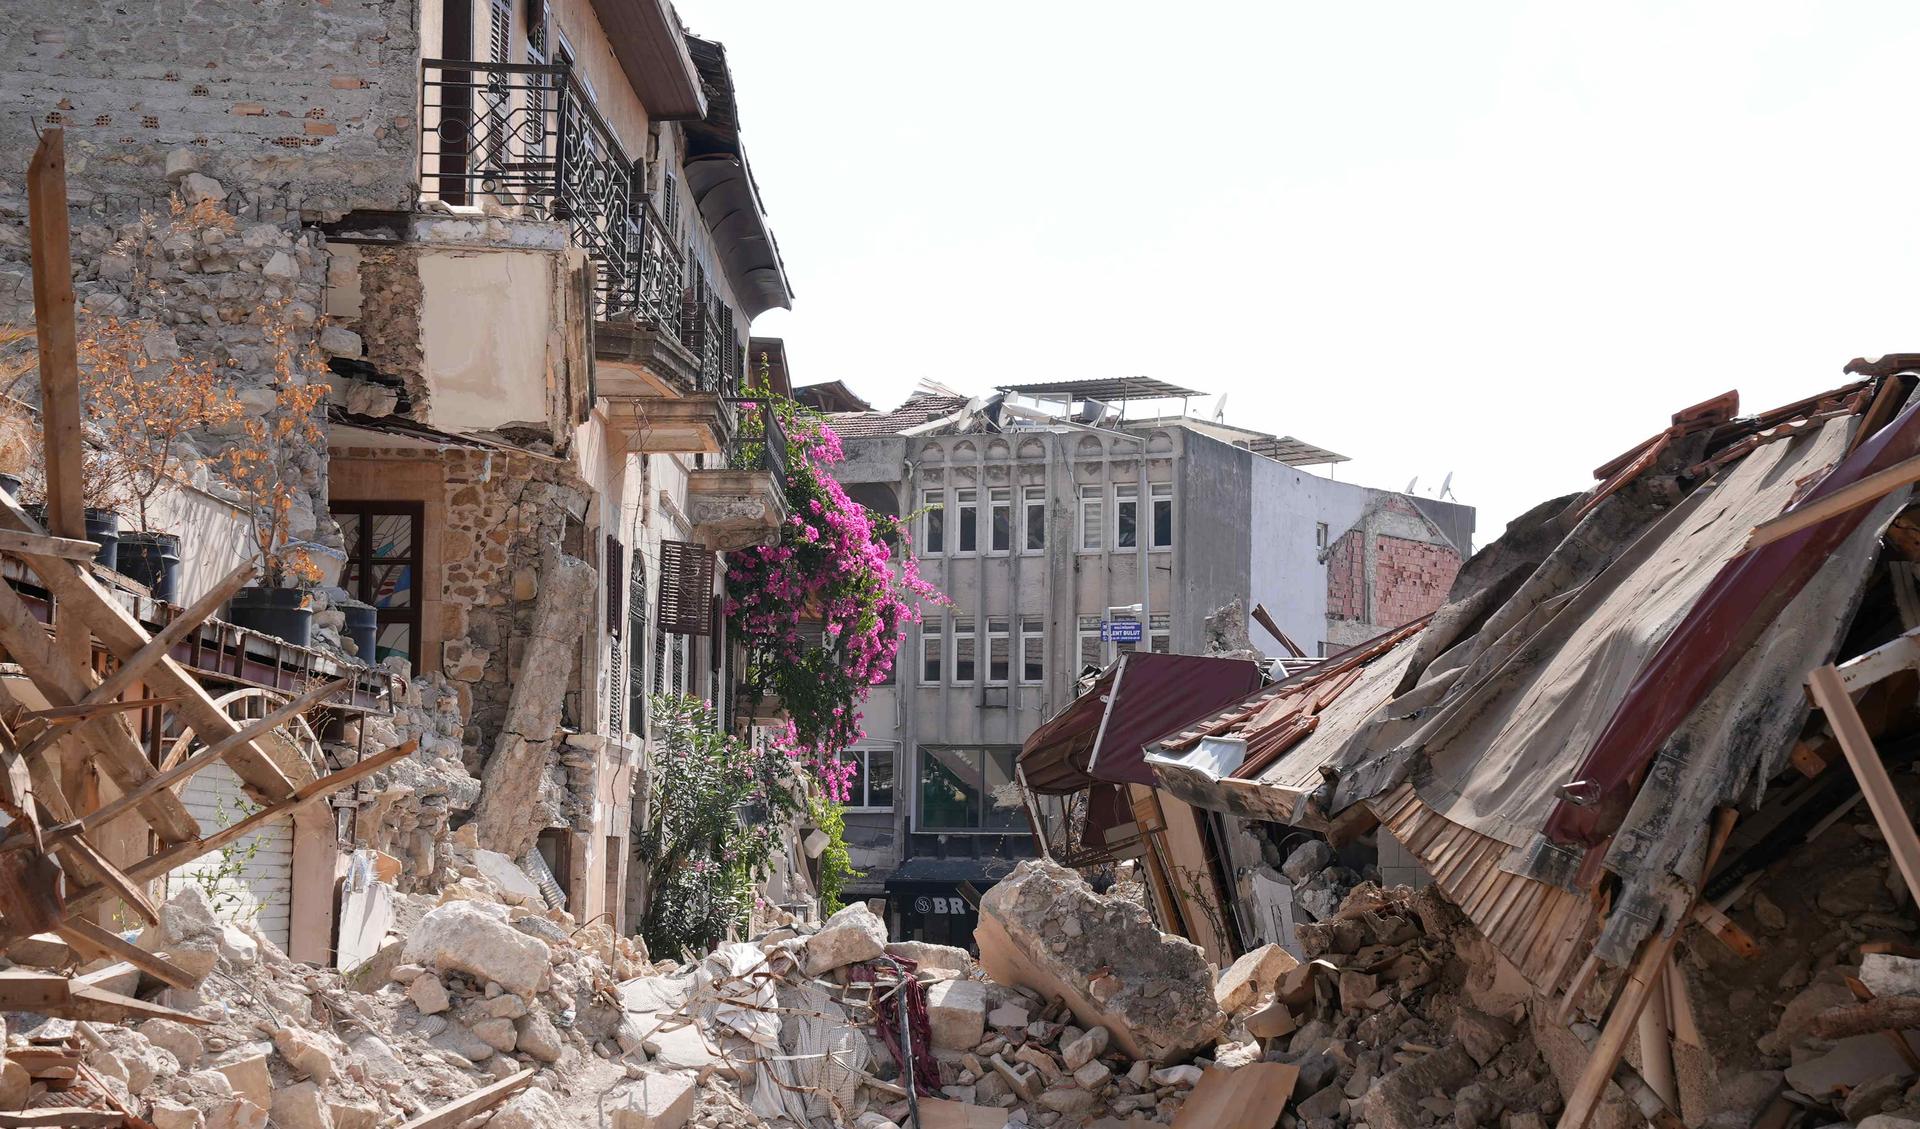 Streets of Antakya after the earthquake. Everywhere is rubble.